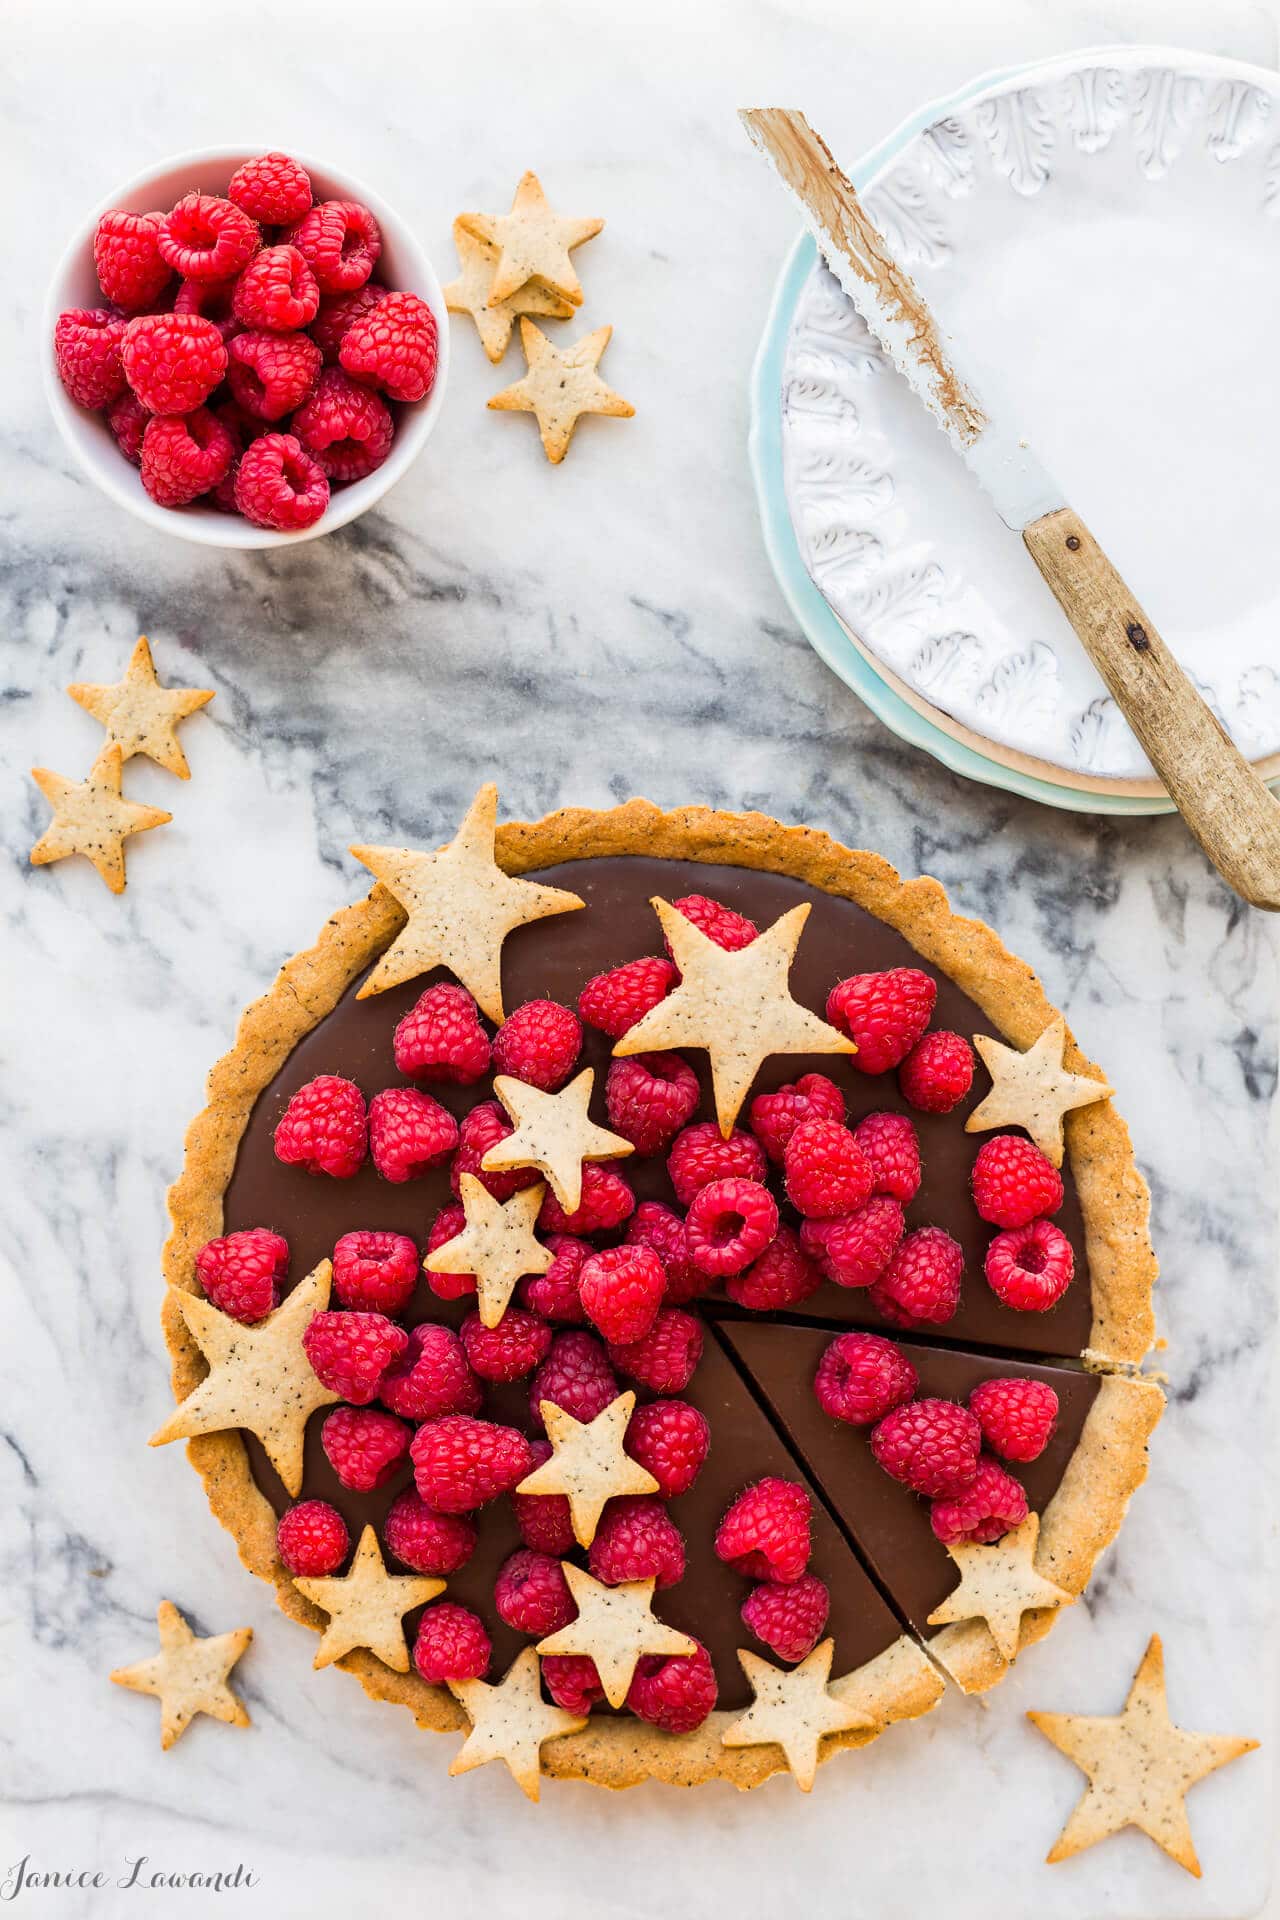 Milk chocolate ganache tart made with a coffee cookie crust and topped with fresh raspberries and cookie stars.